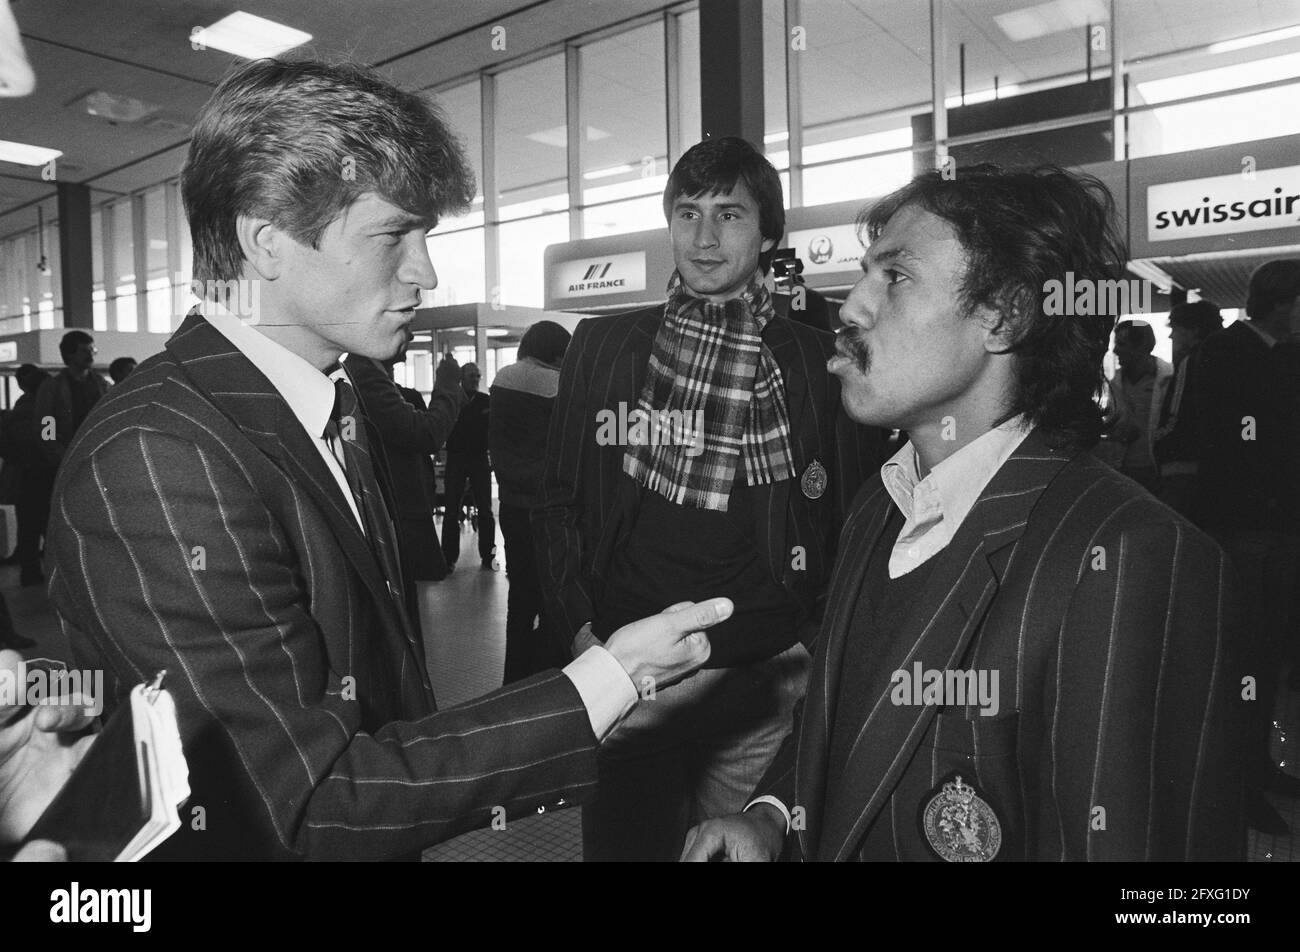 From left to right Jan Peters, Tjeu La Ling and Simon Tahamata in conversation at Schiphol Airport before departure, November 16, 1981, sports, airports, soccer players, The Netherlands, 20th century press agency photo, news to remember, documentary, historic photography 1945-1990, visual stories, human history of the Twentieth Century, capturing moments in time Stock Photo